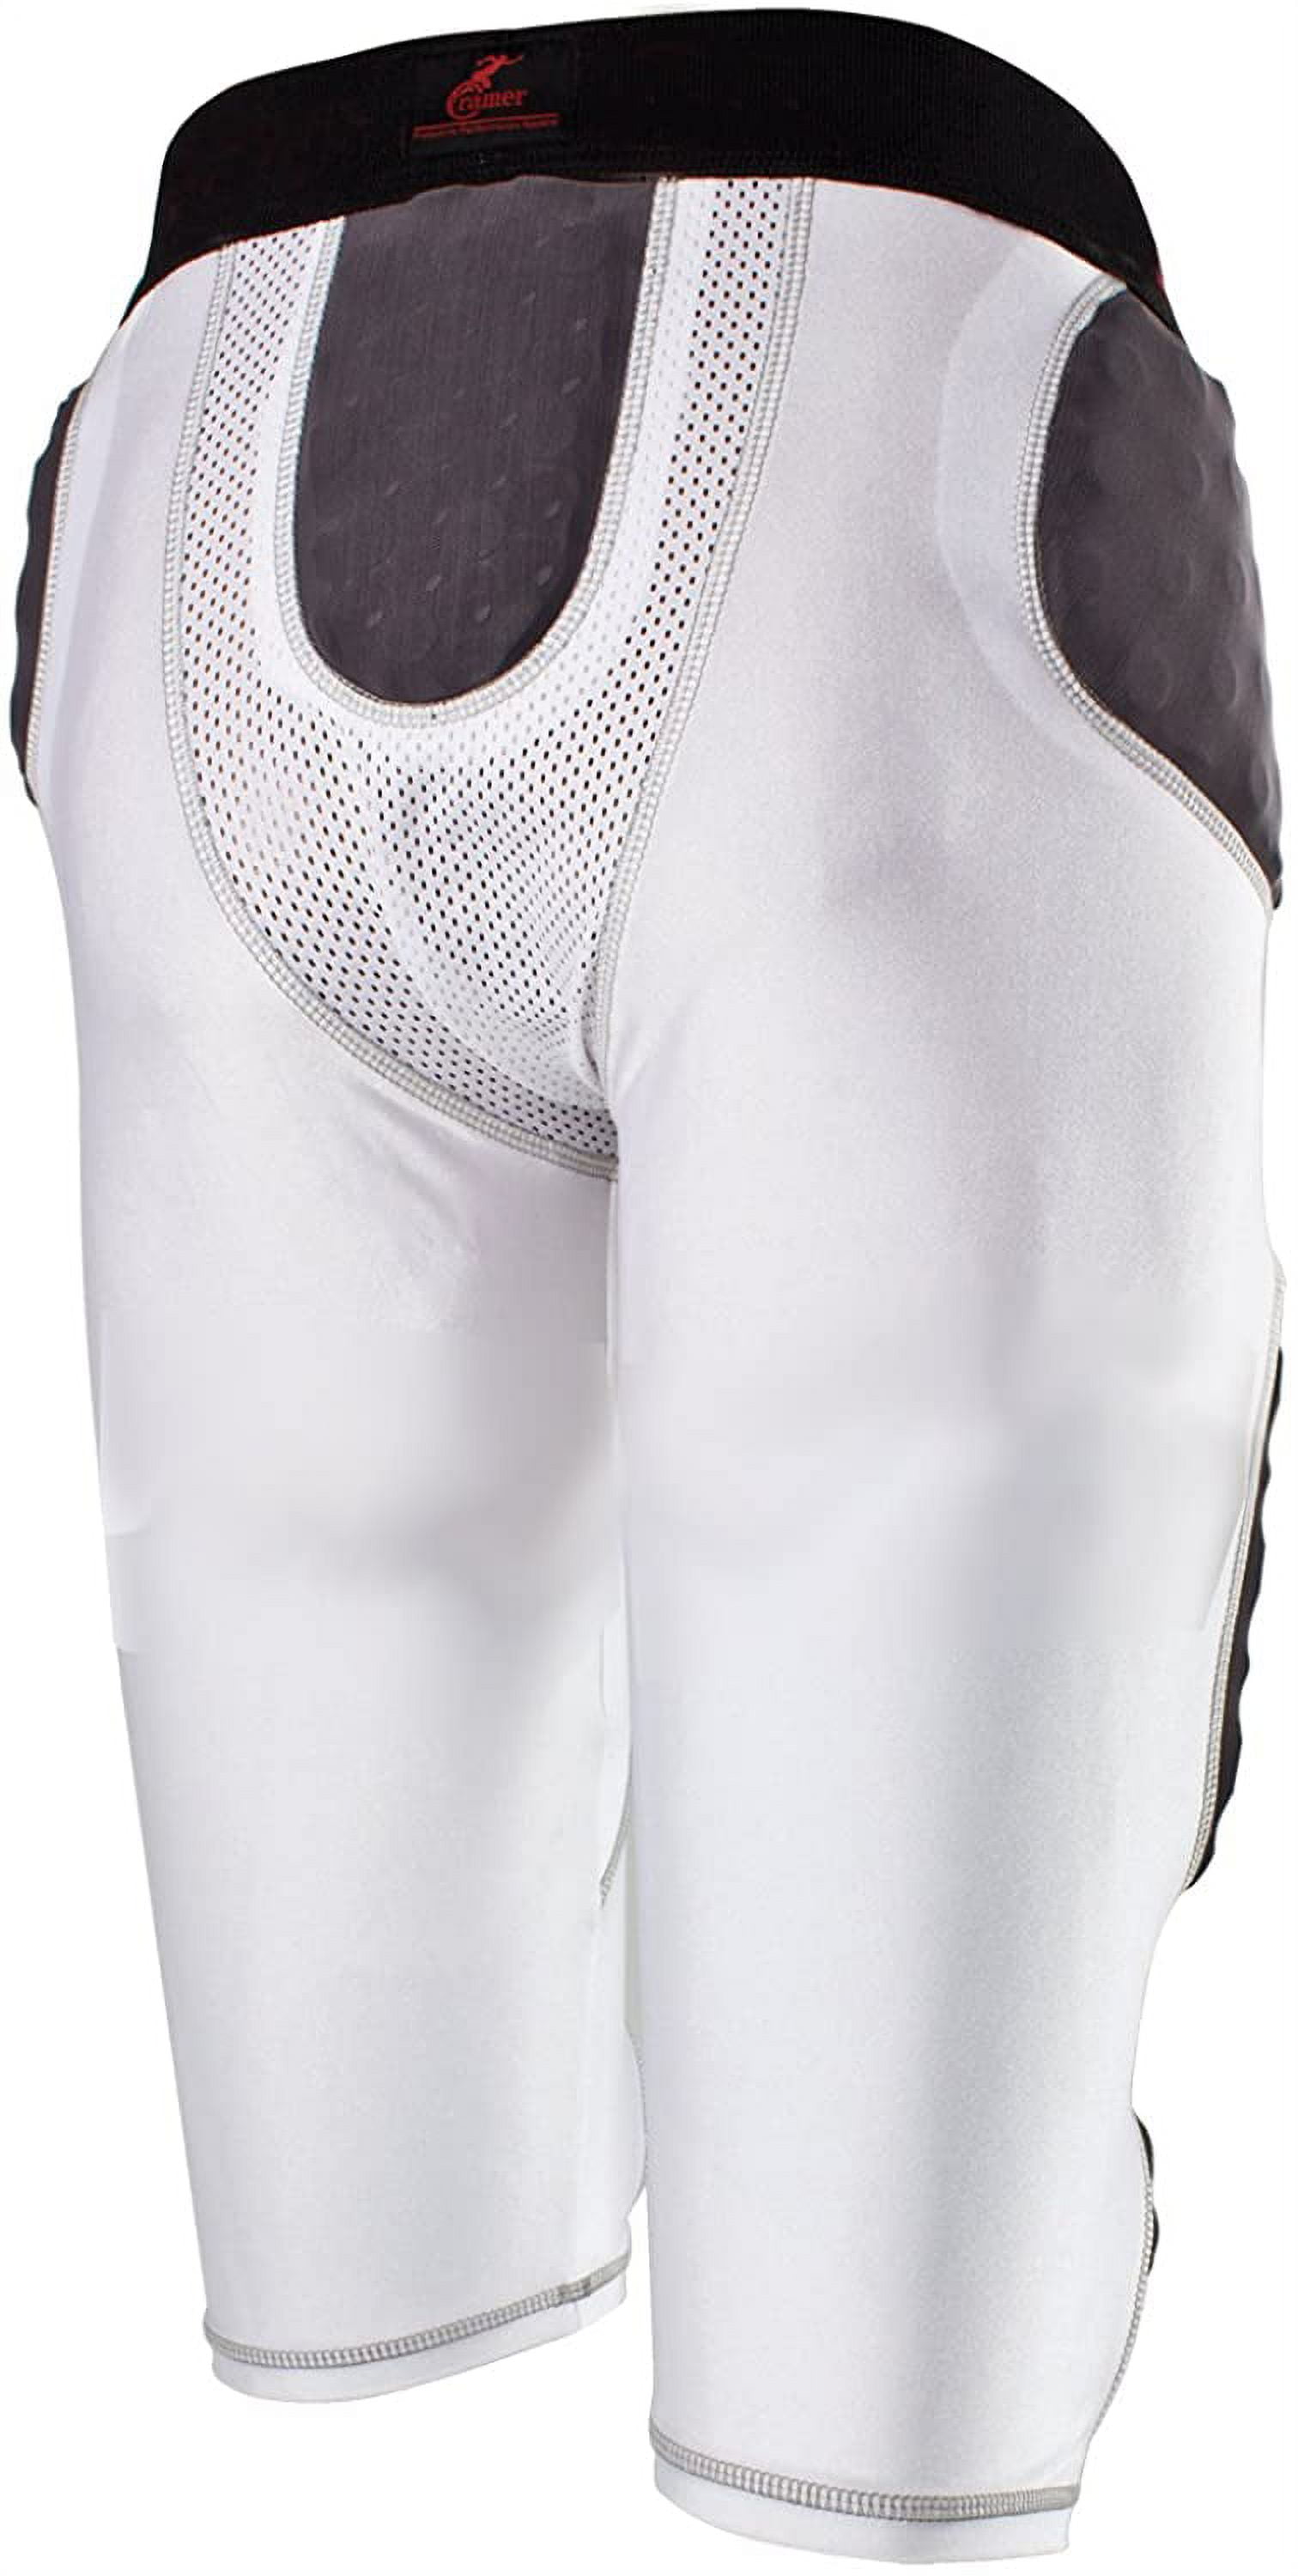 Cramer Skill 7 Pad Football Girdle With Integrated Hip, Thigh, Knee and  Tail Pads, White, Large 